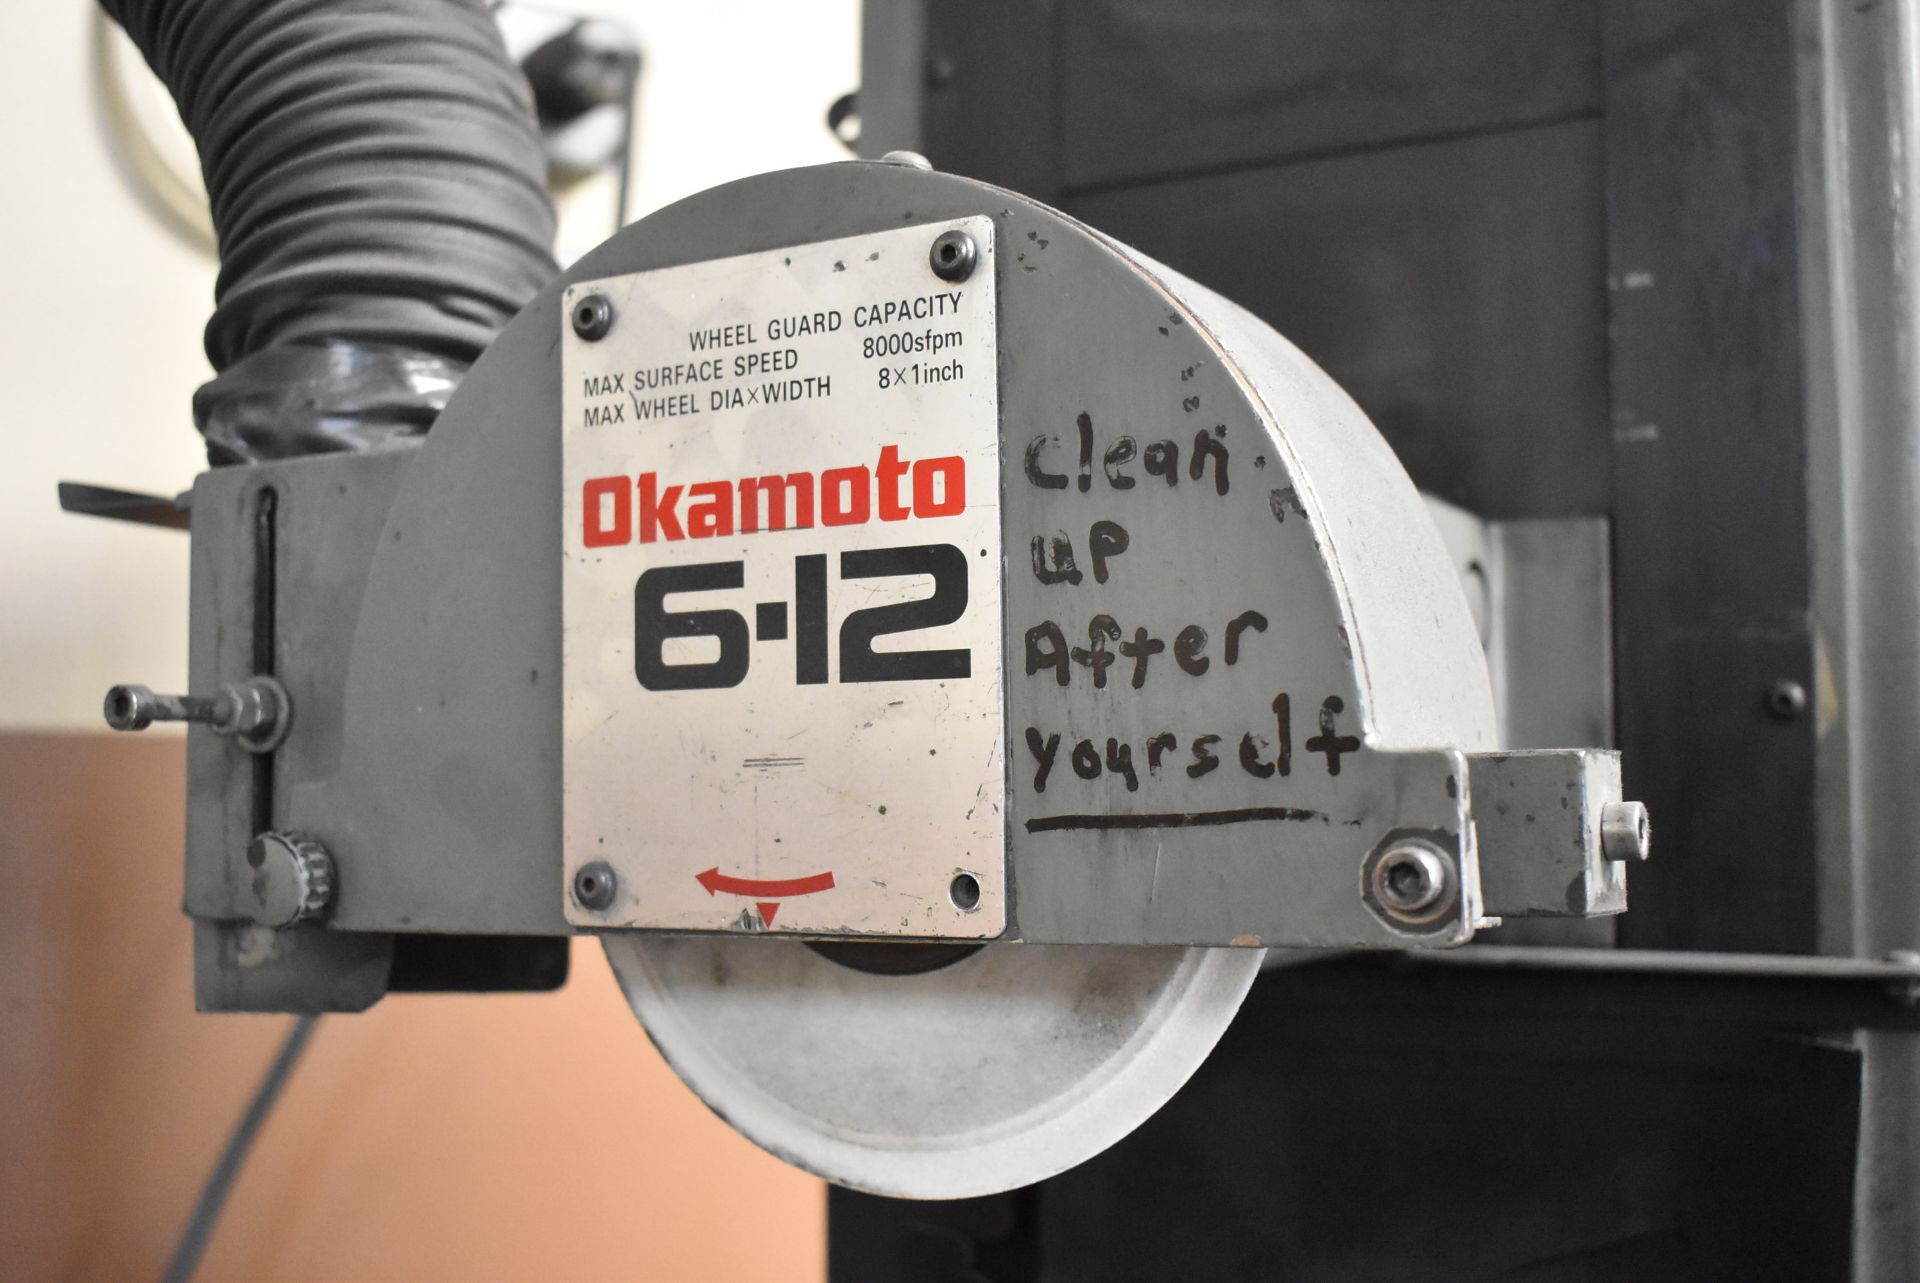 OKAMOTO L6-12B CONVENTIONAL SURFACE GRINDER WITH 6"X12" ELECTROMAGNETIC CHUCK, SPEEDS TO 3450 RPM, - Image 3 of 7